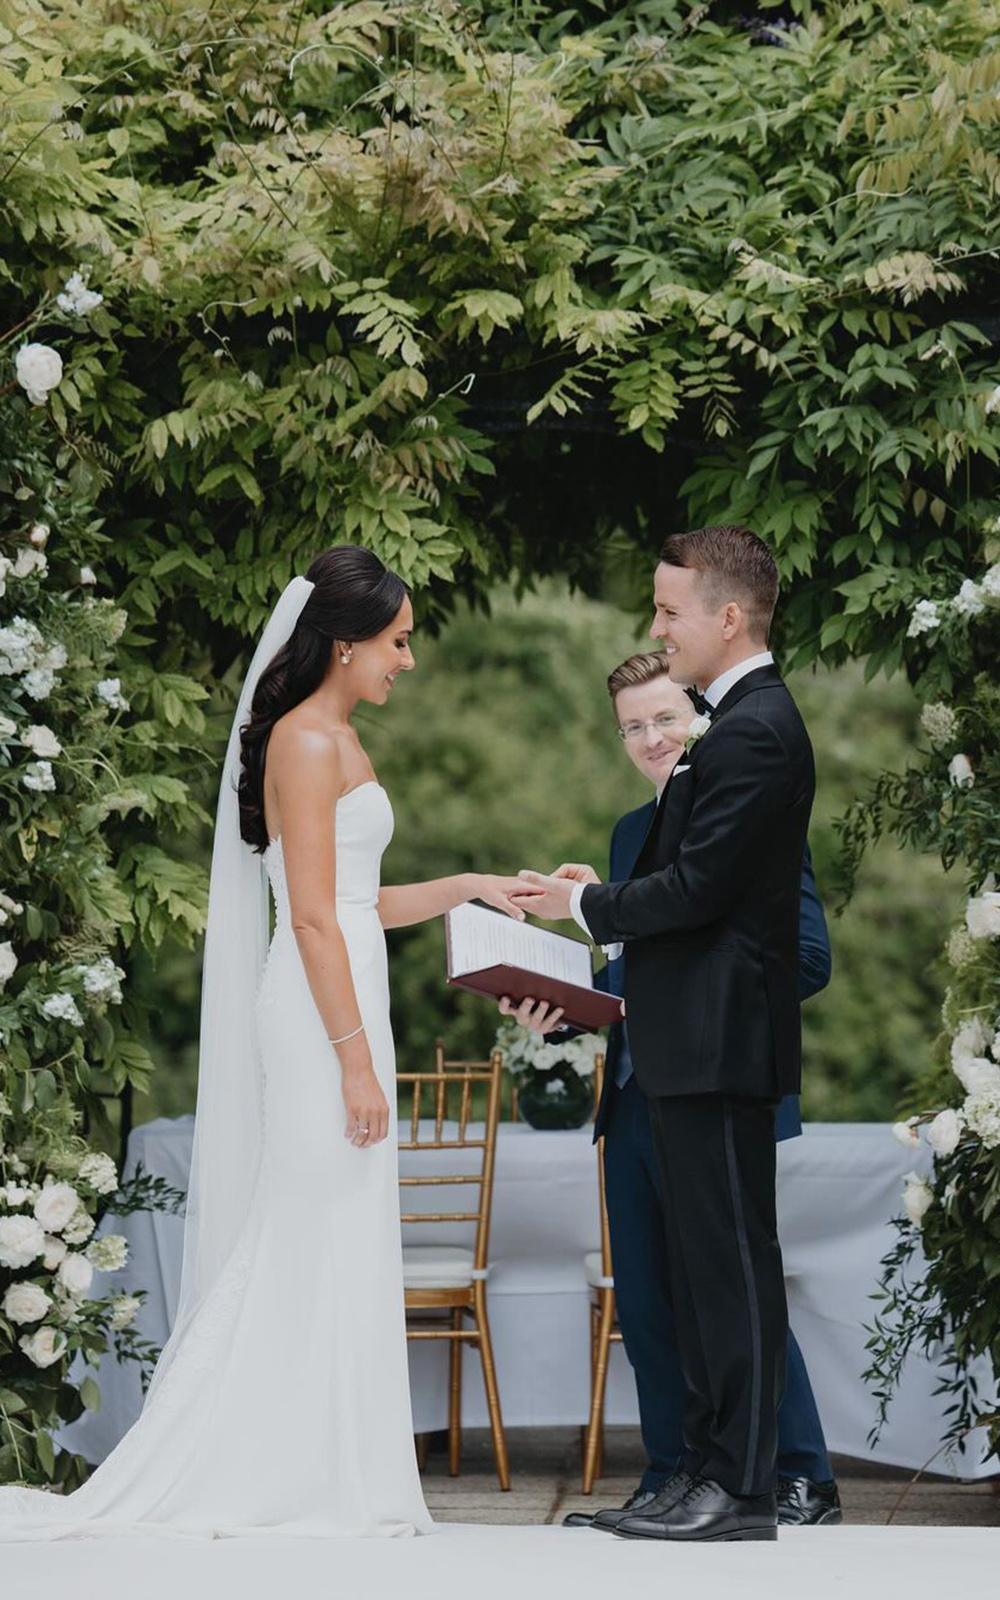 Wedding Vows For Her - The Best Examples To Inspire You